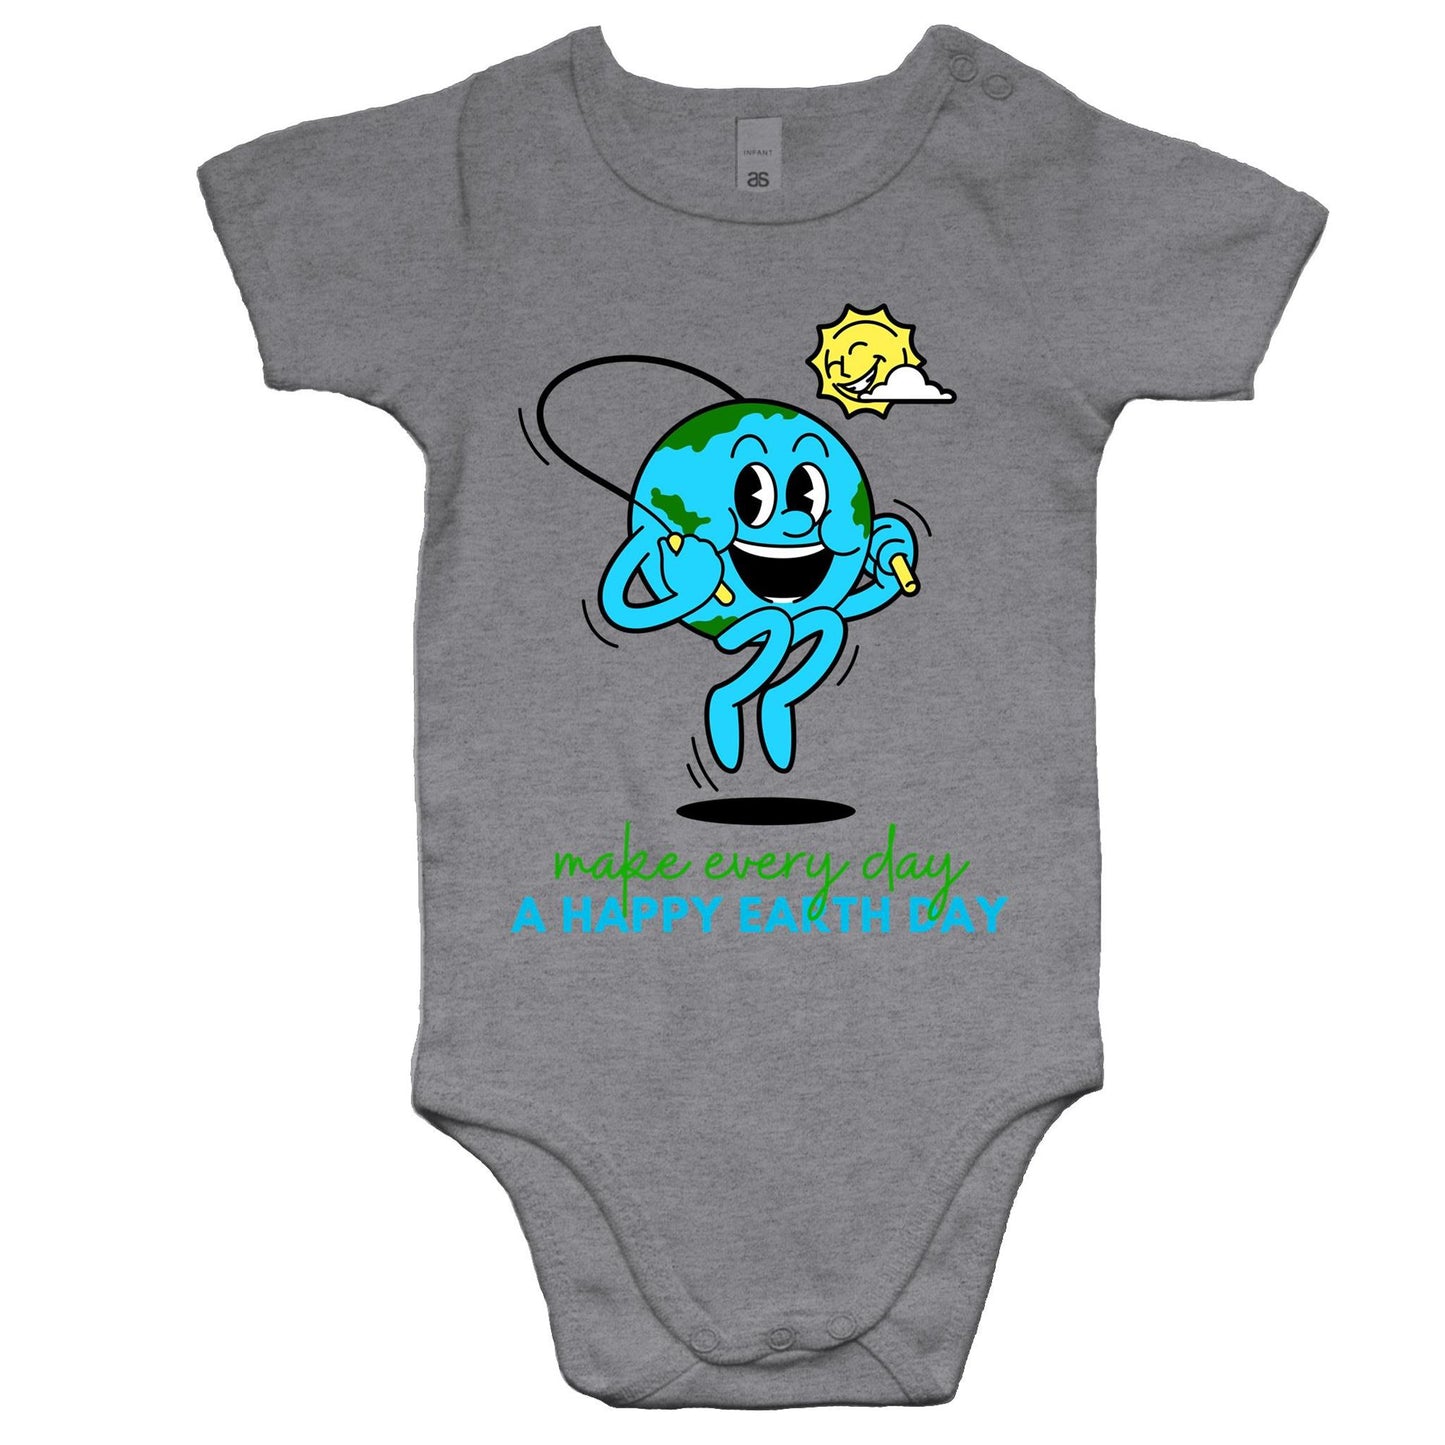 Make Every Day A Happy Earth Day - Baby Bodysuit Grey Marle Baby Bodysuit Environment